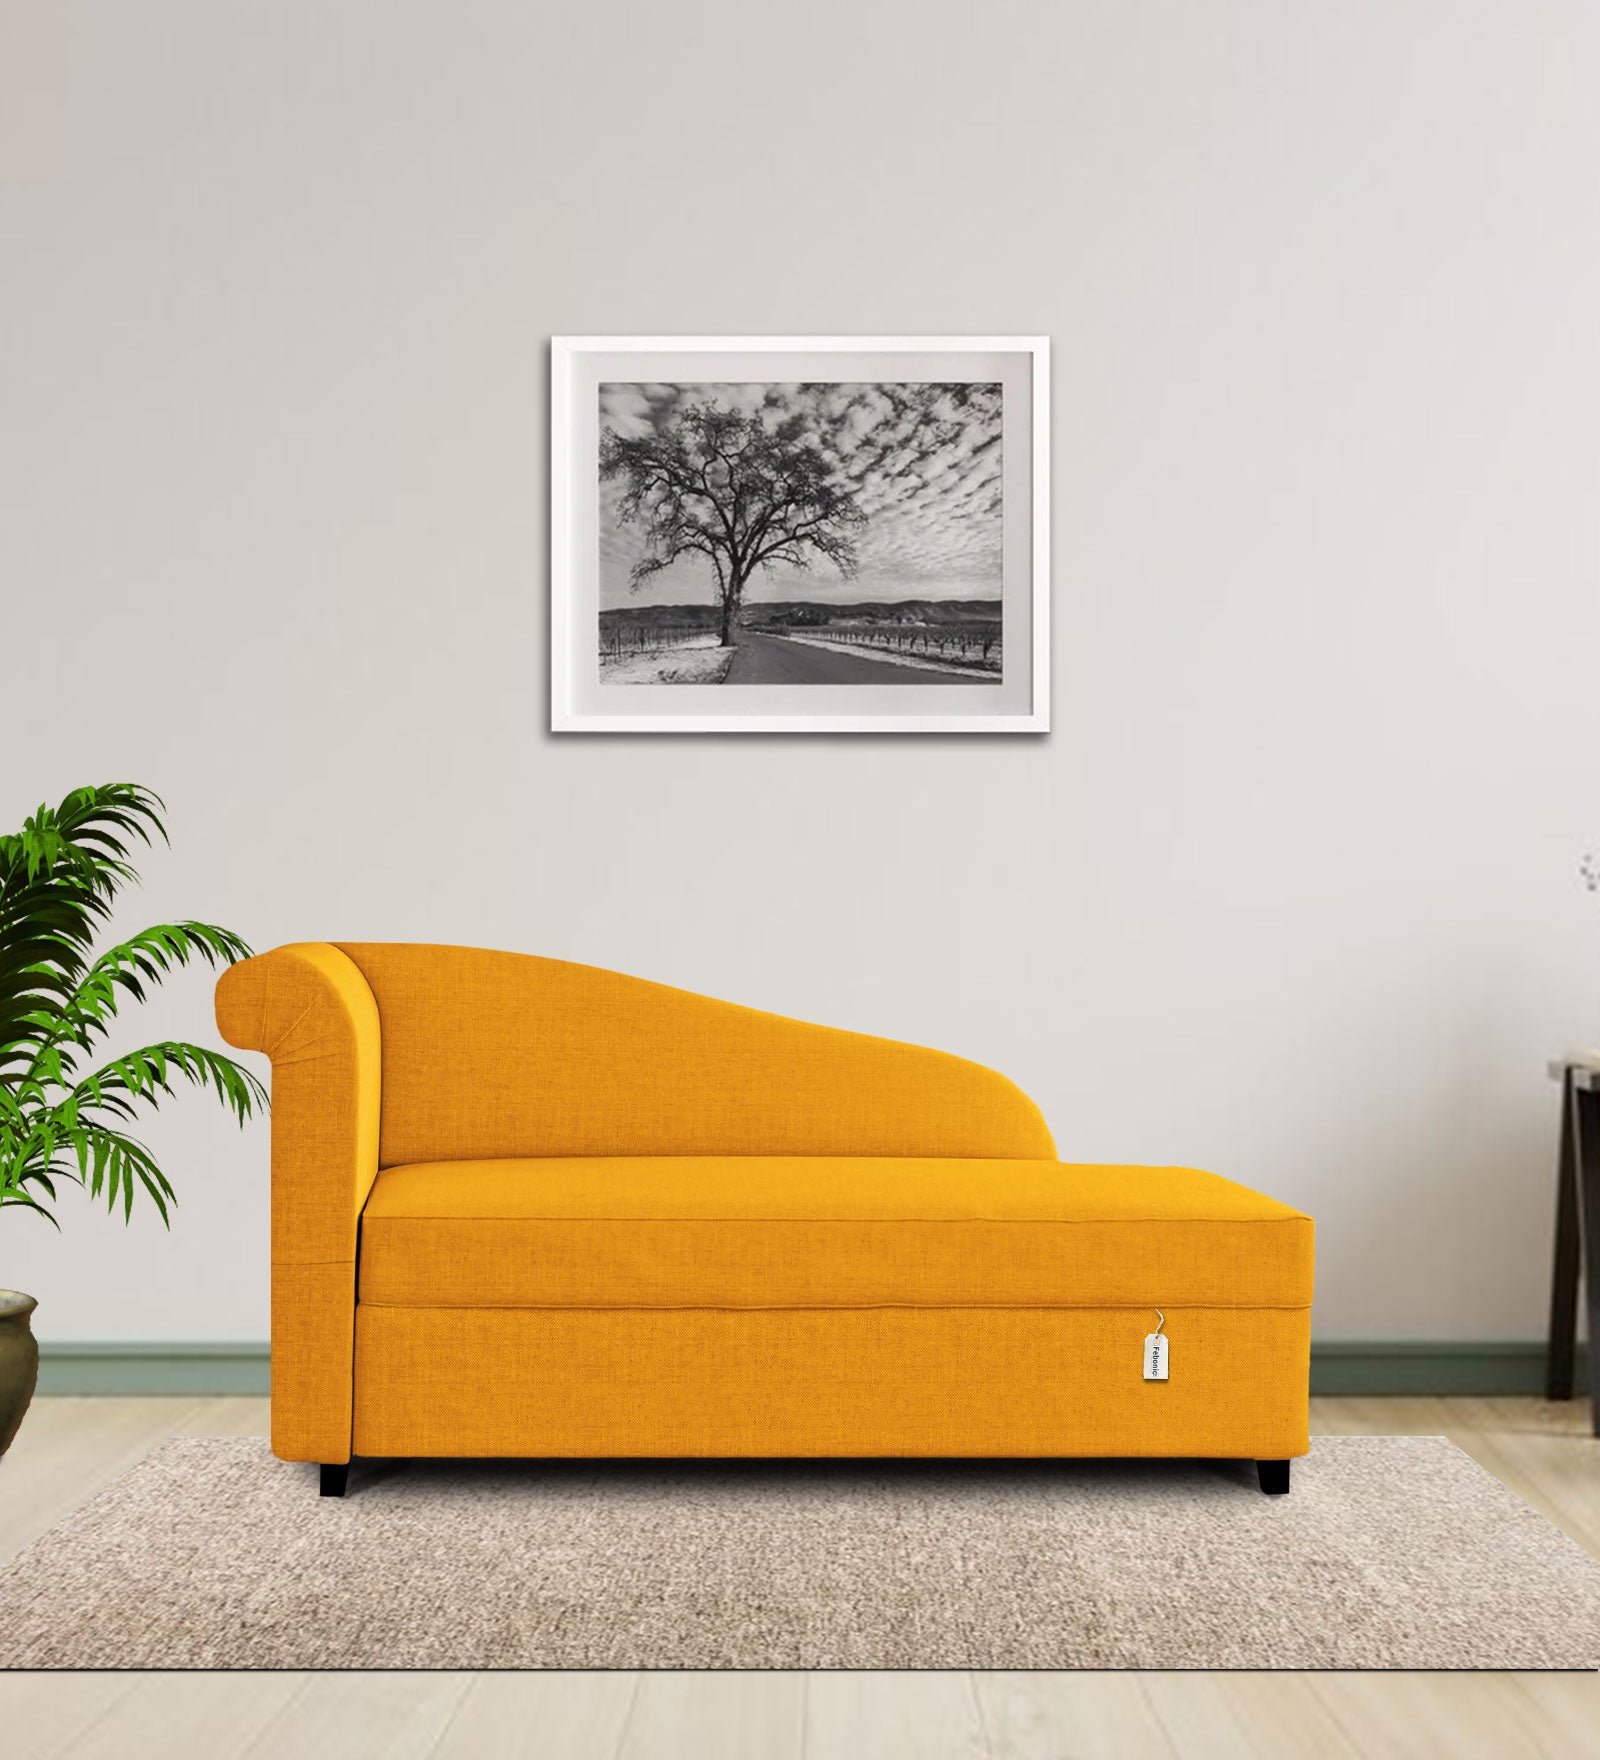 Toppy Fabric RHS Chaise Lounger In Bold Yellow Colour With Storage